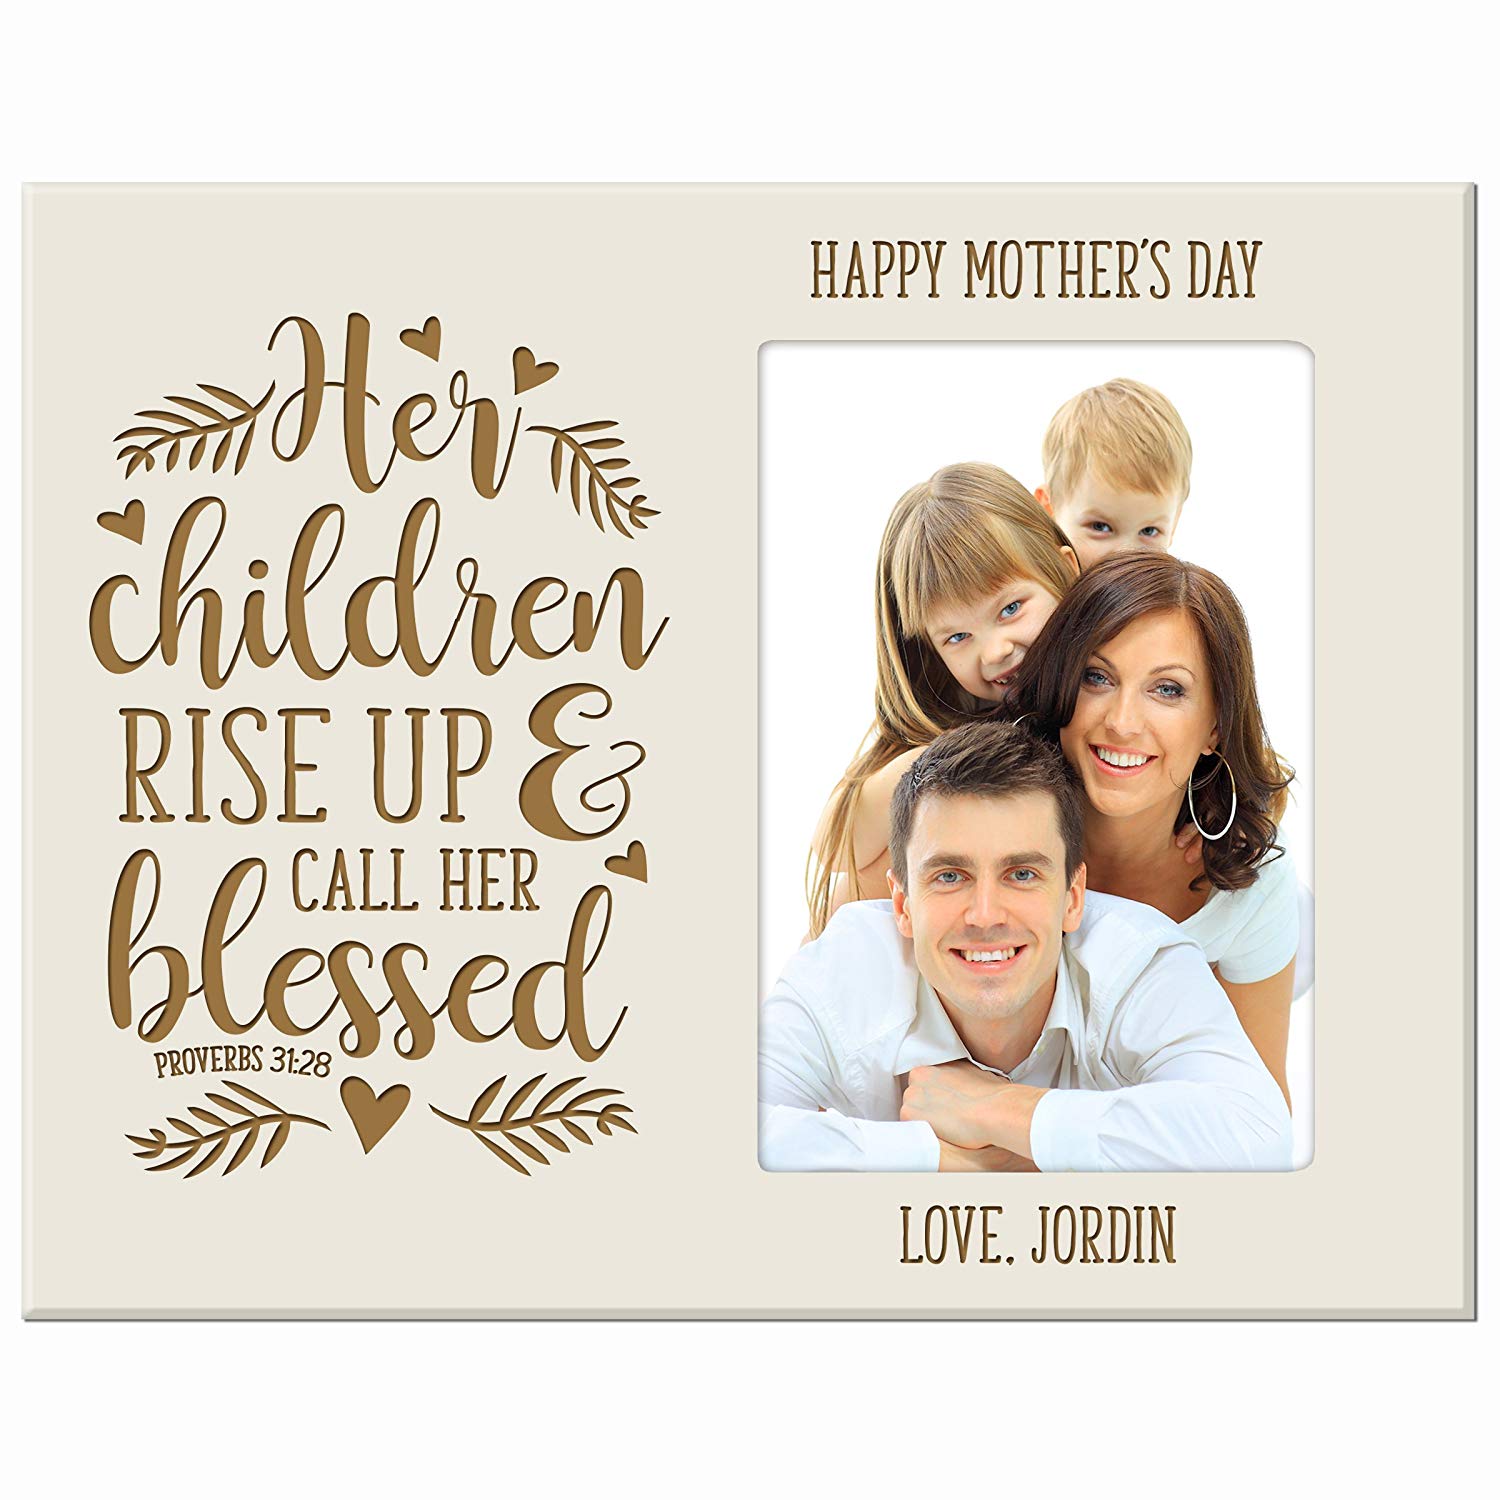 Personalized Happy Mother's Day Photo Frame - Her Children Rise Up